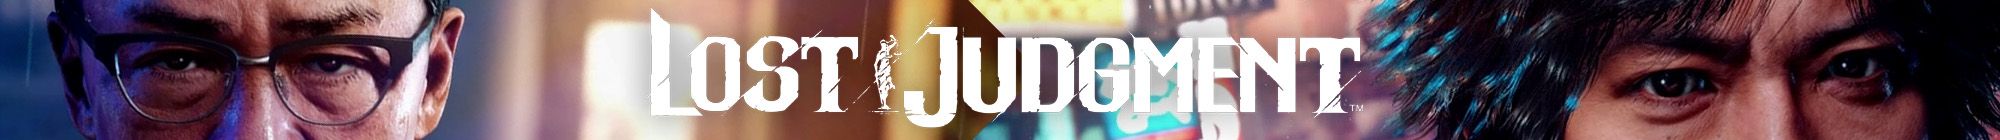 lost-judgment-banner-1